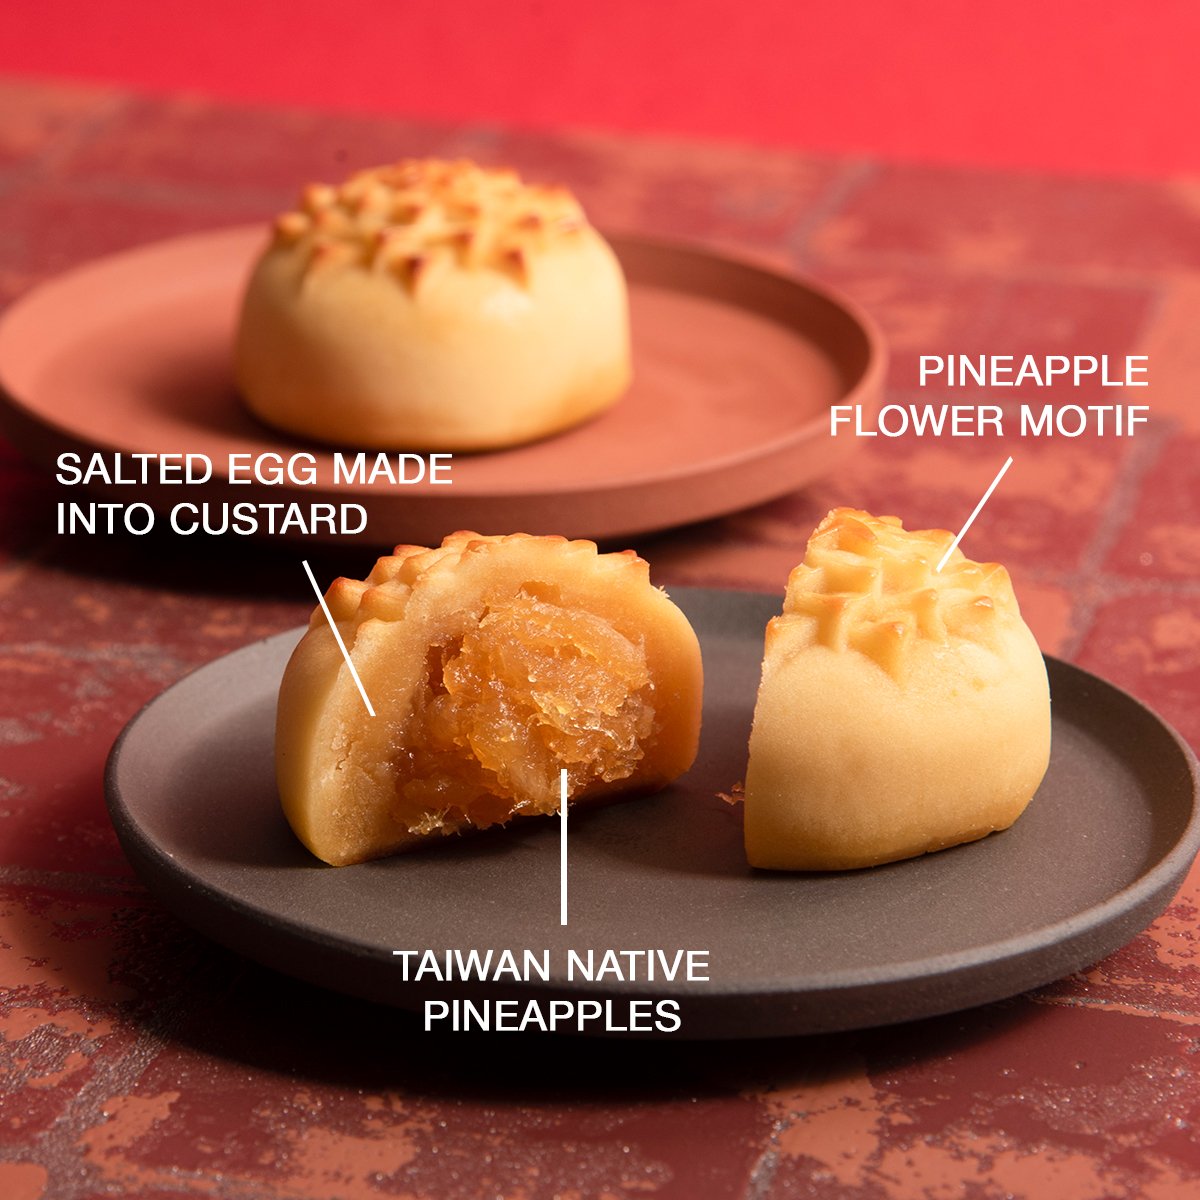 CNY Pineapple Fortune Cake - Fillings